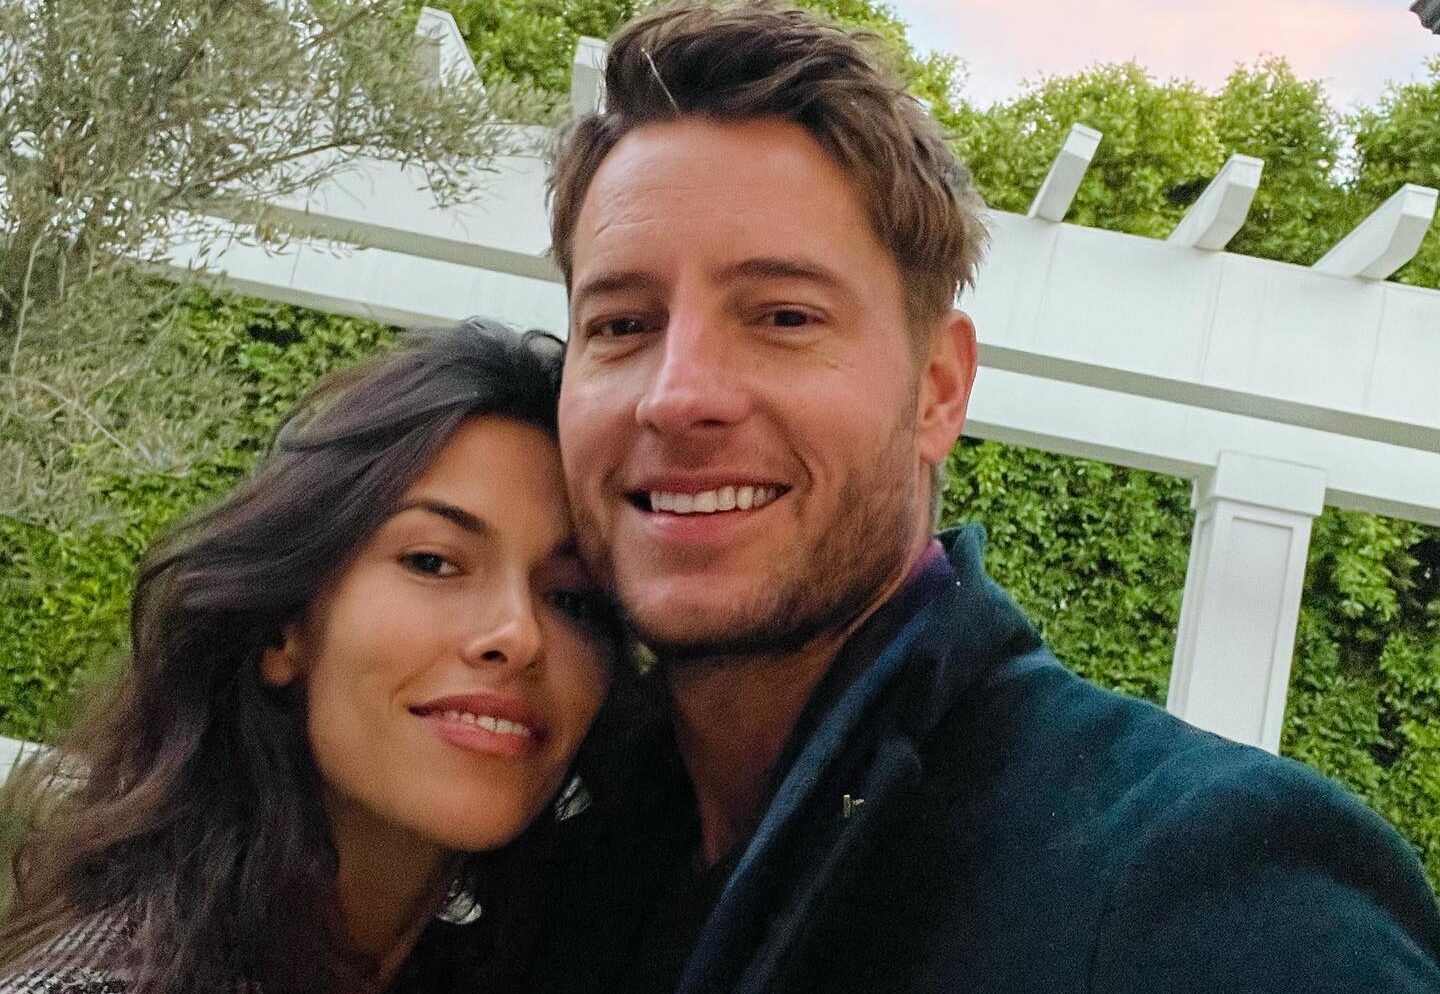  Young and the Restless’ Sofia Pernas and Justin Hartley: From costars to real-life husband and wife. What character did they play on the Y&R?